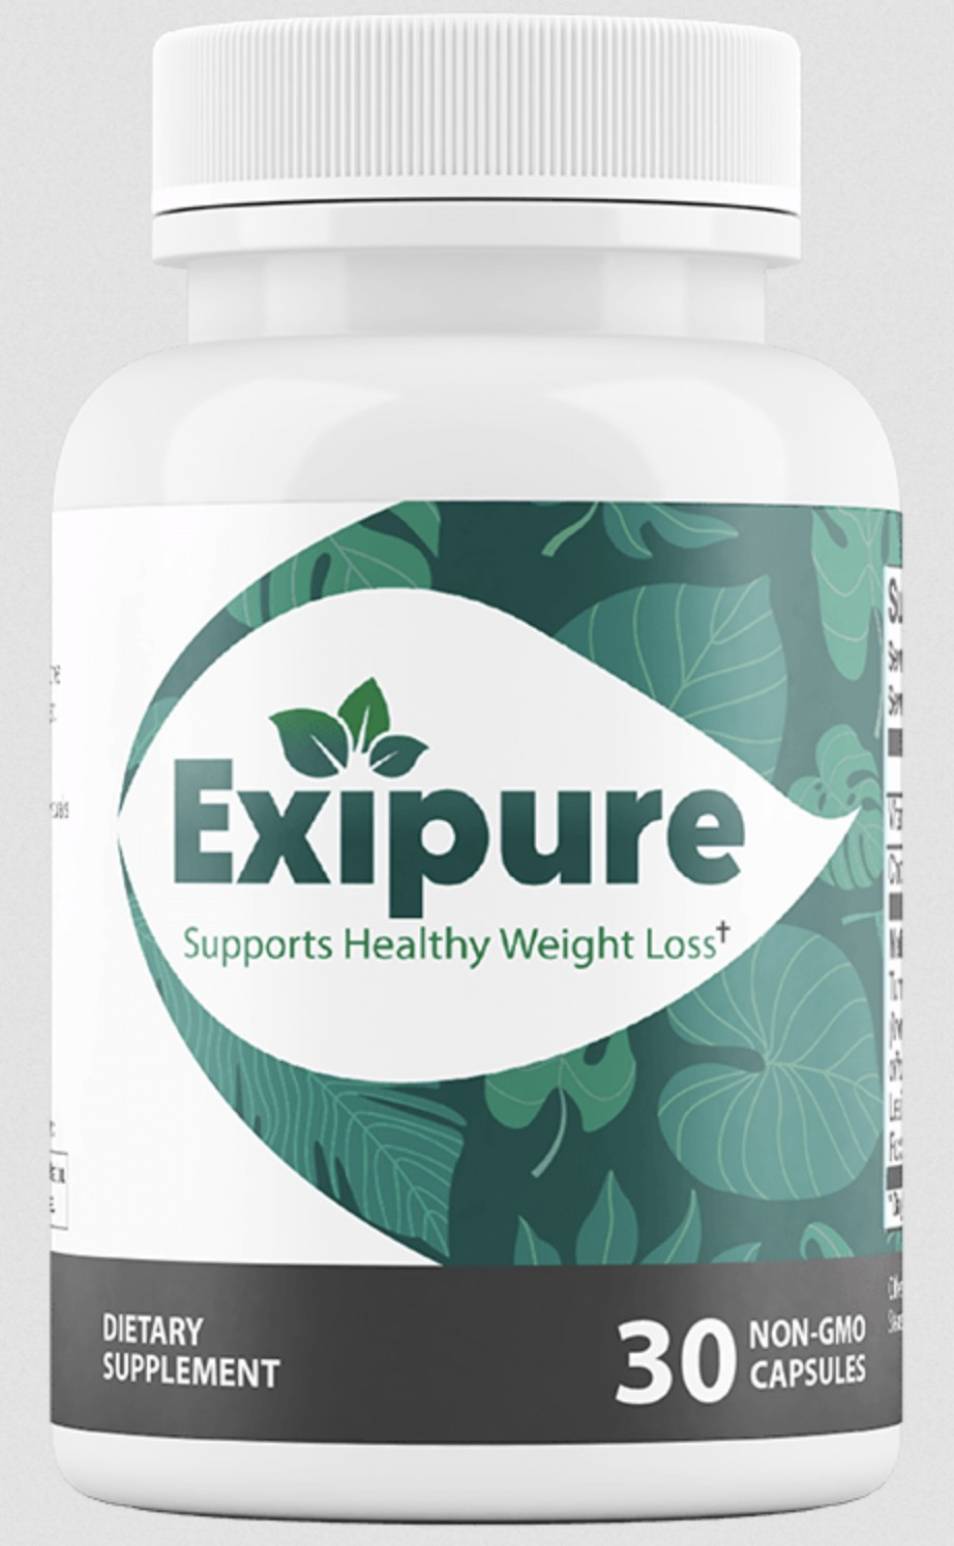 Exipure Real Or Scam